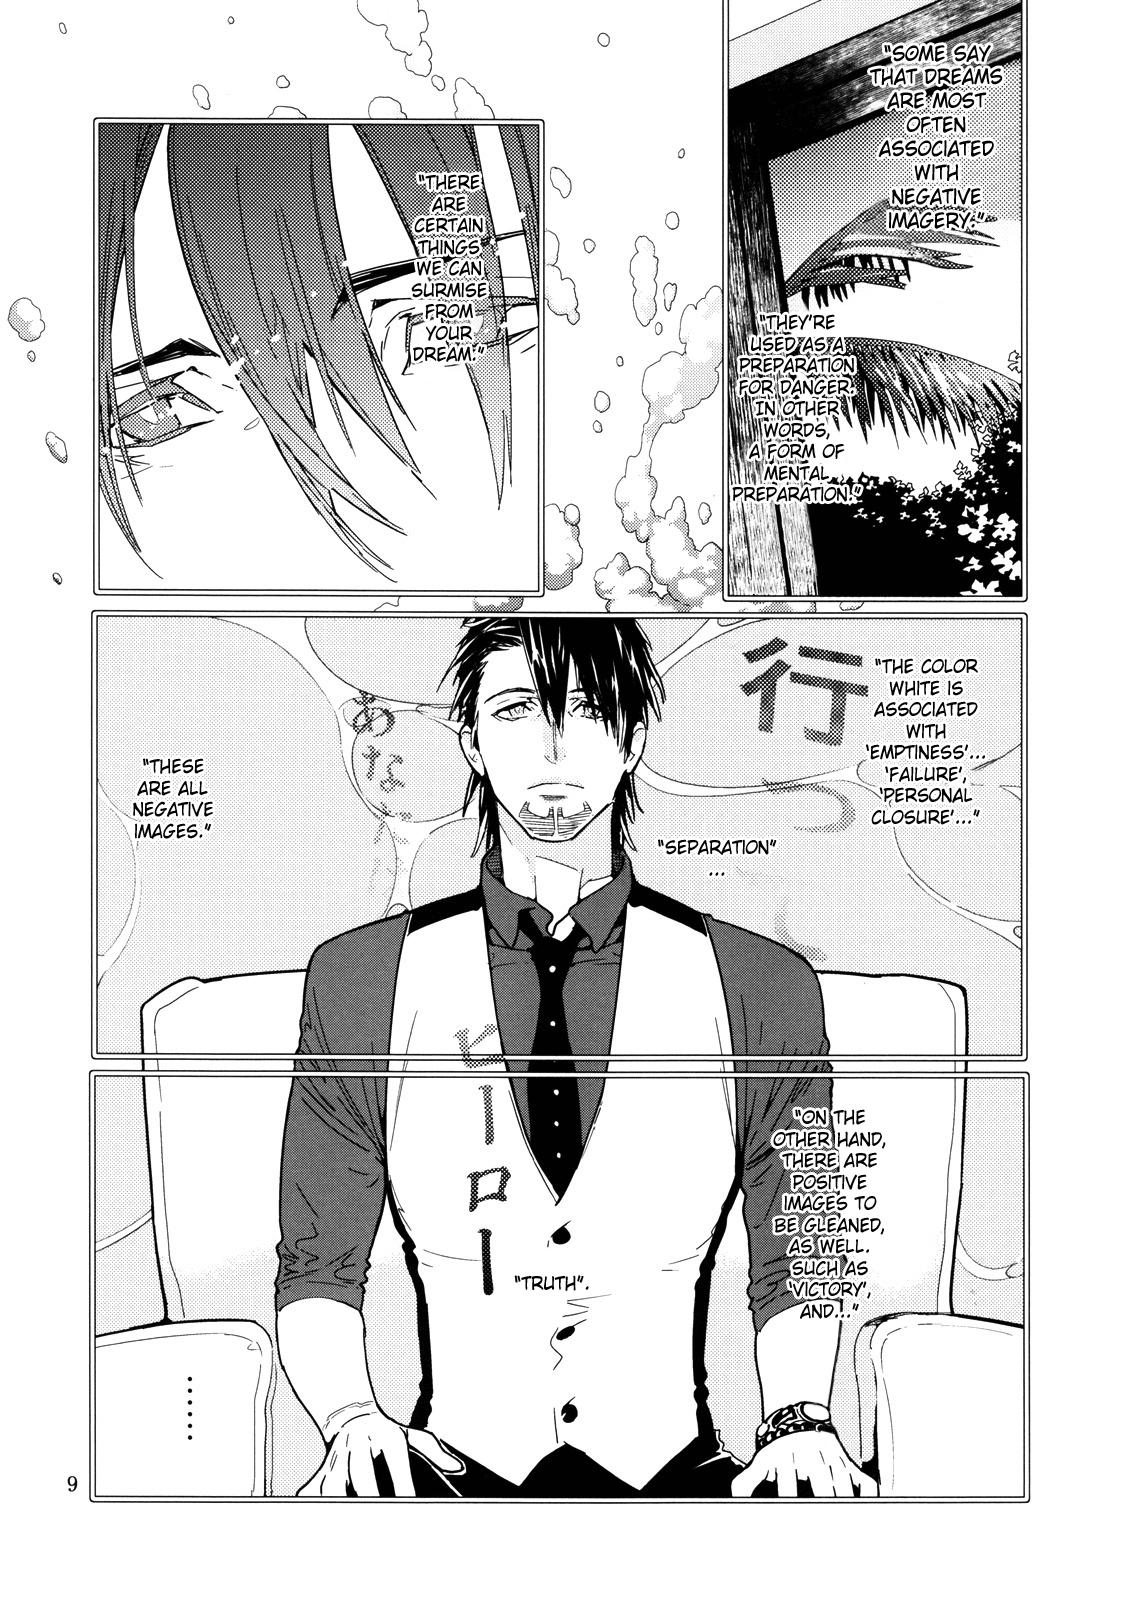 Chinese Candy Man 4 - Tiger and bunny Hardcorend - Page 8